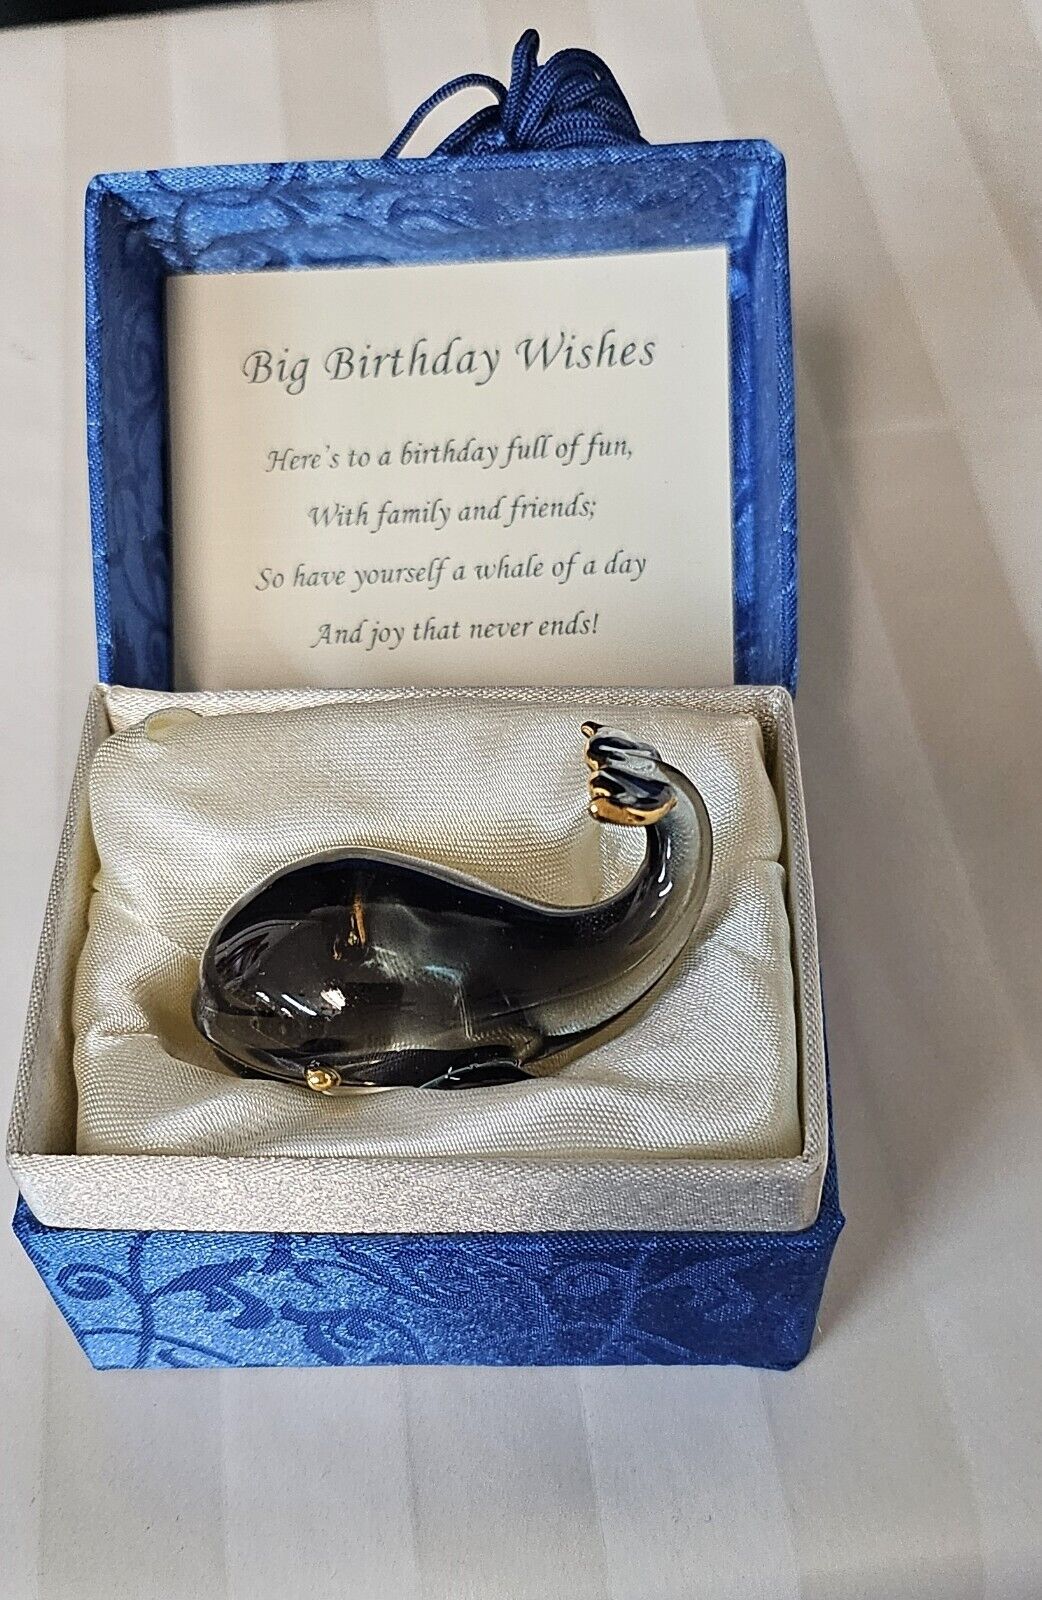 A Whale of a Birthday